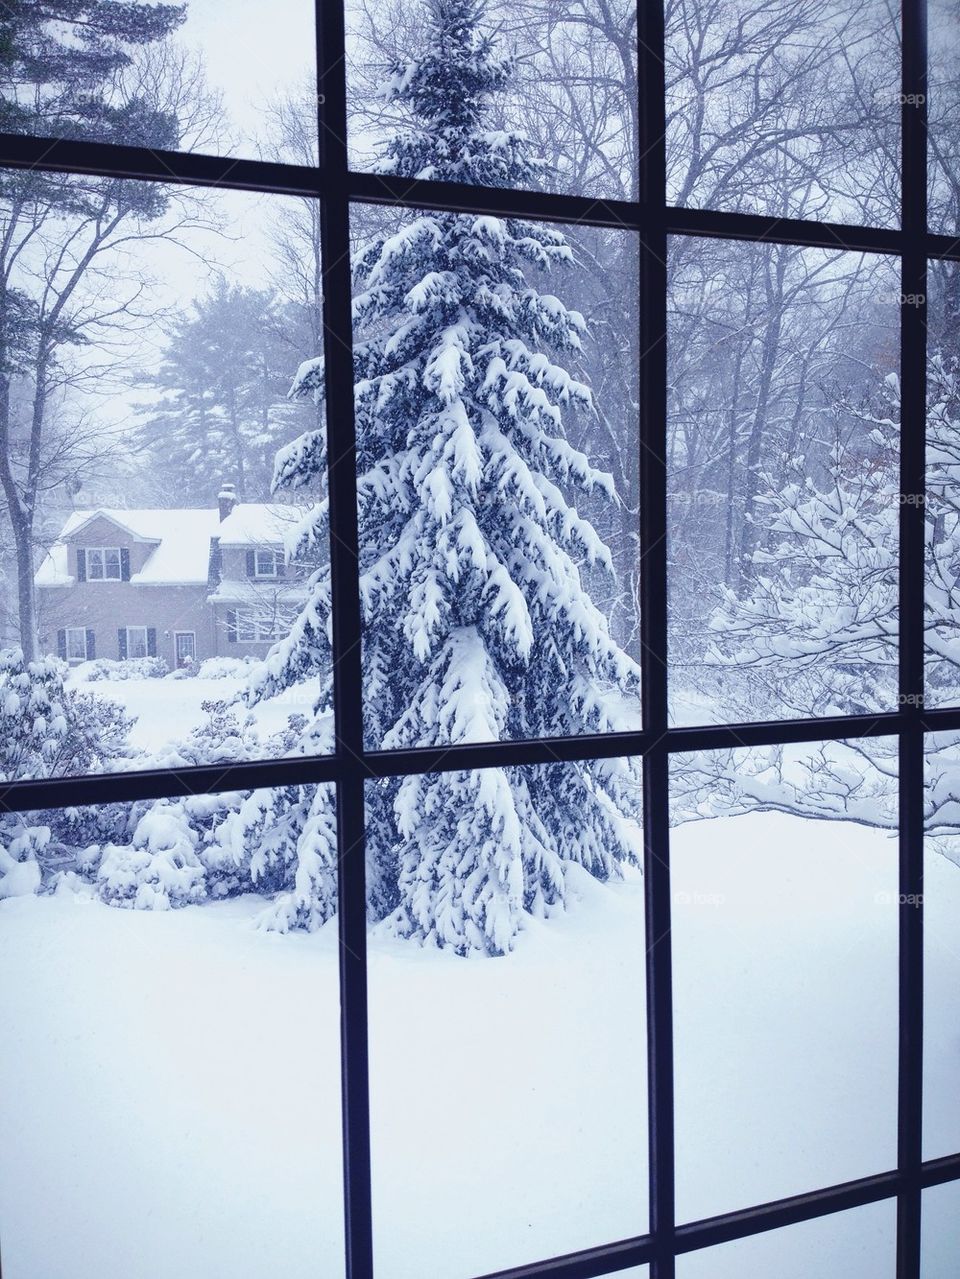 View of tree covered with snow from window